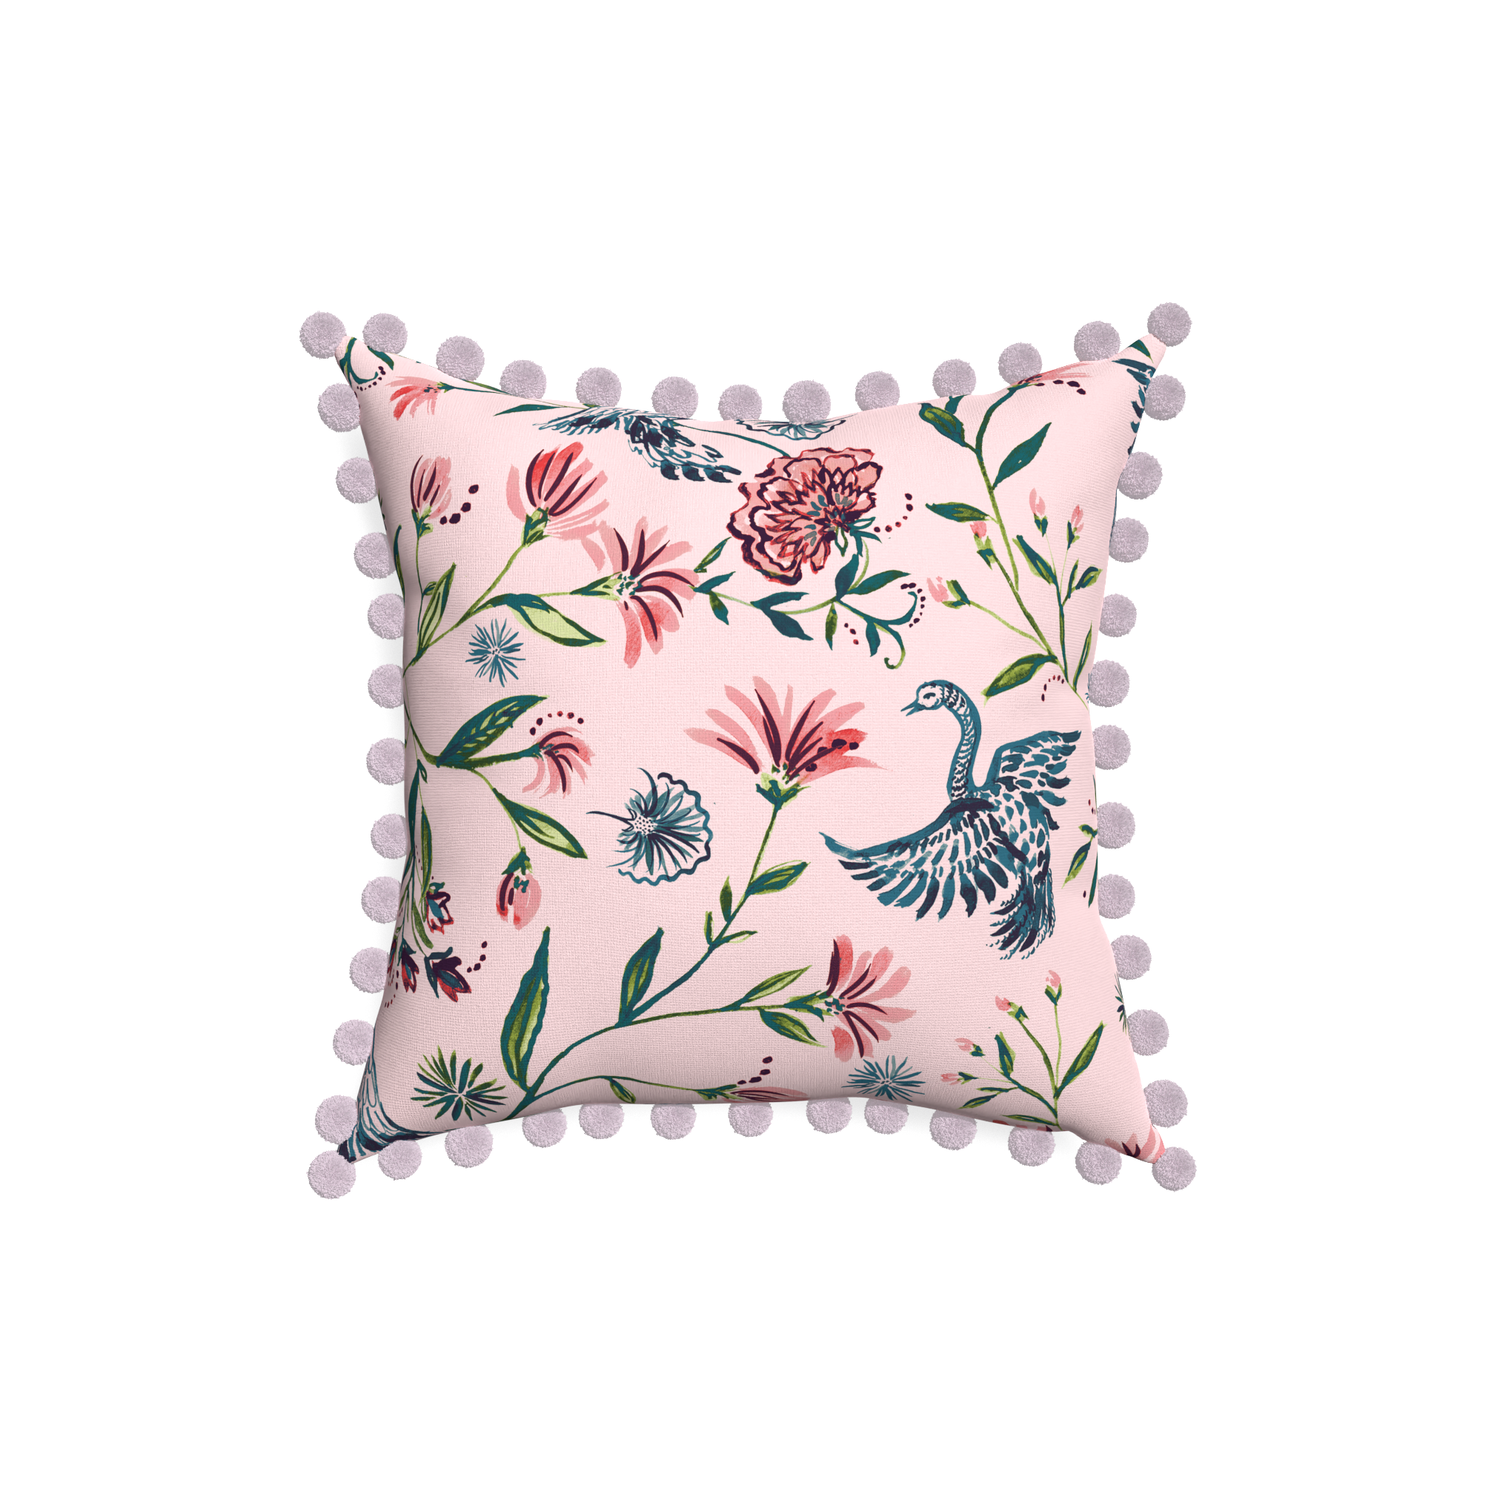 18-square daphne rose custom pillow with l on white background